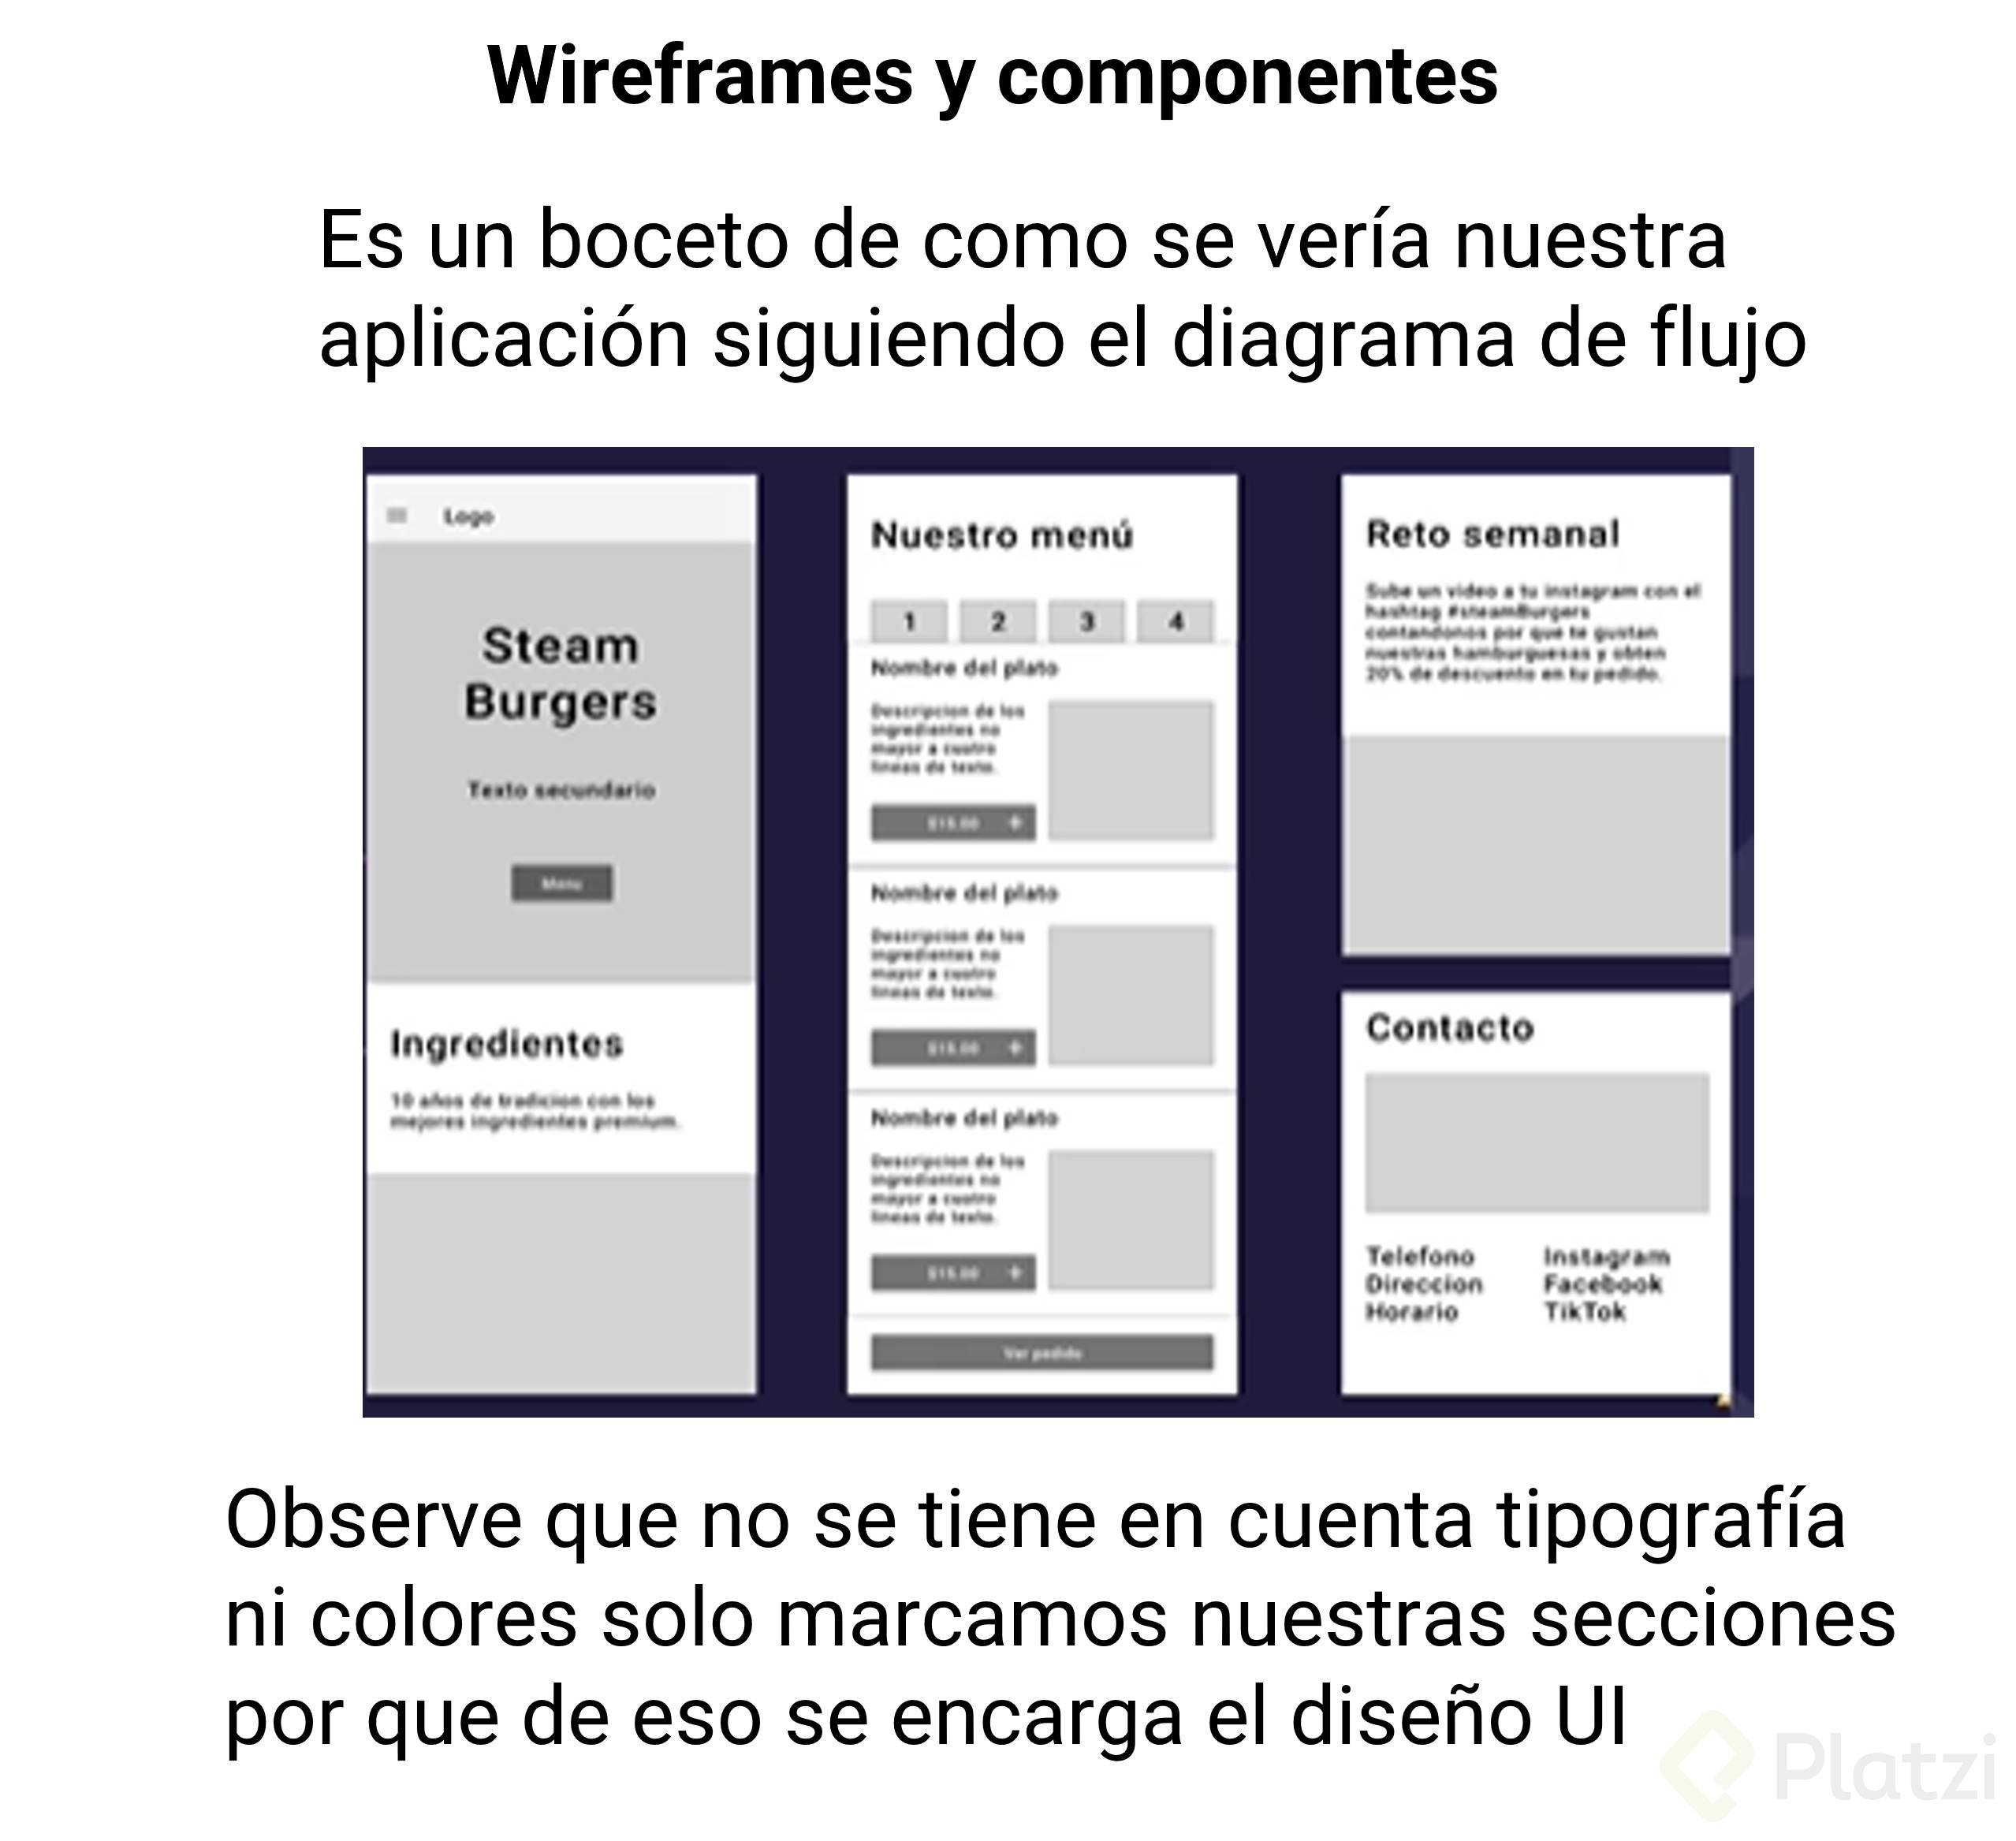 Wireframes y componentes.png